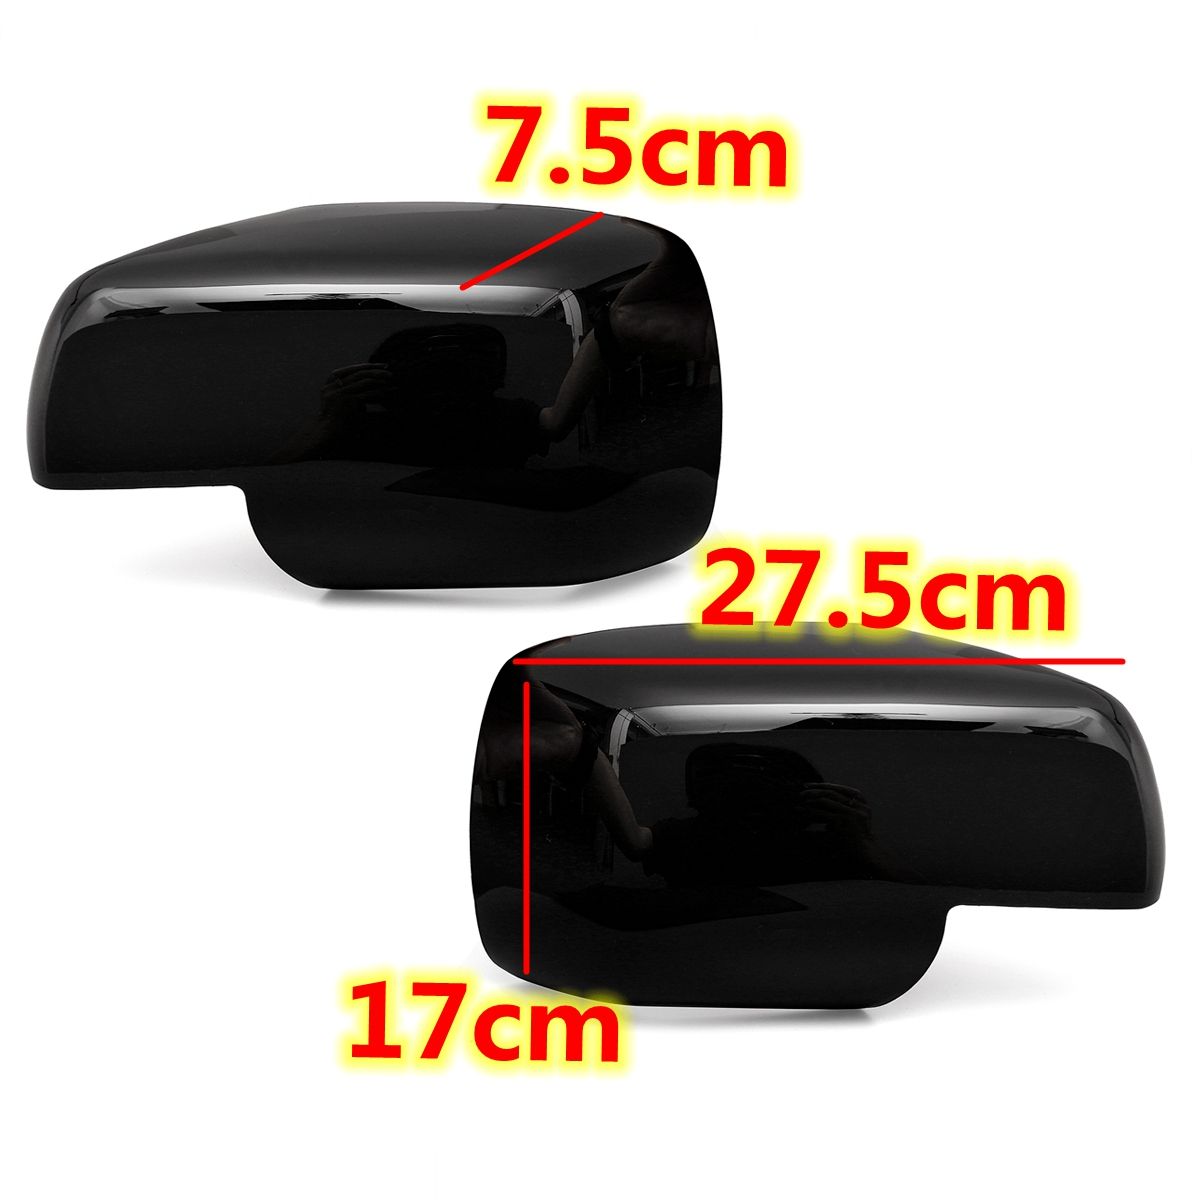 Pair-Gloss-Black-Car-Wing-Side-Mirror-Cover-For-Land-Rover-Discovery-3-Freelander-2-Range-Rover-Spor-1584185